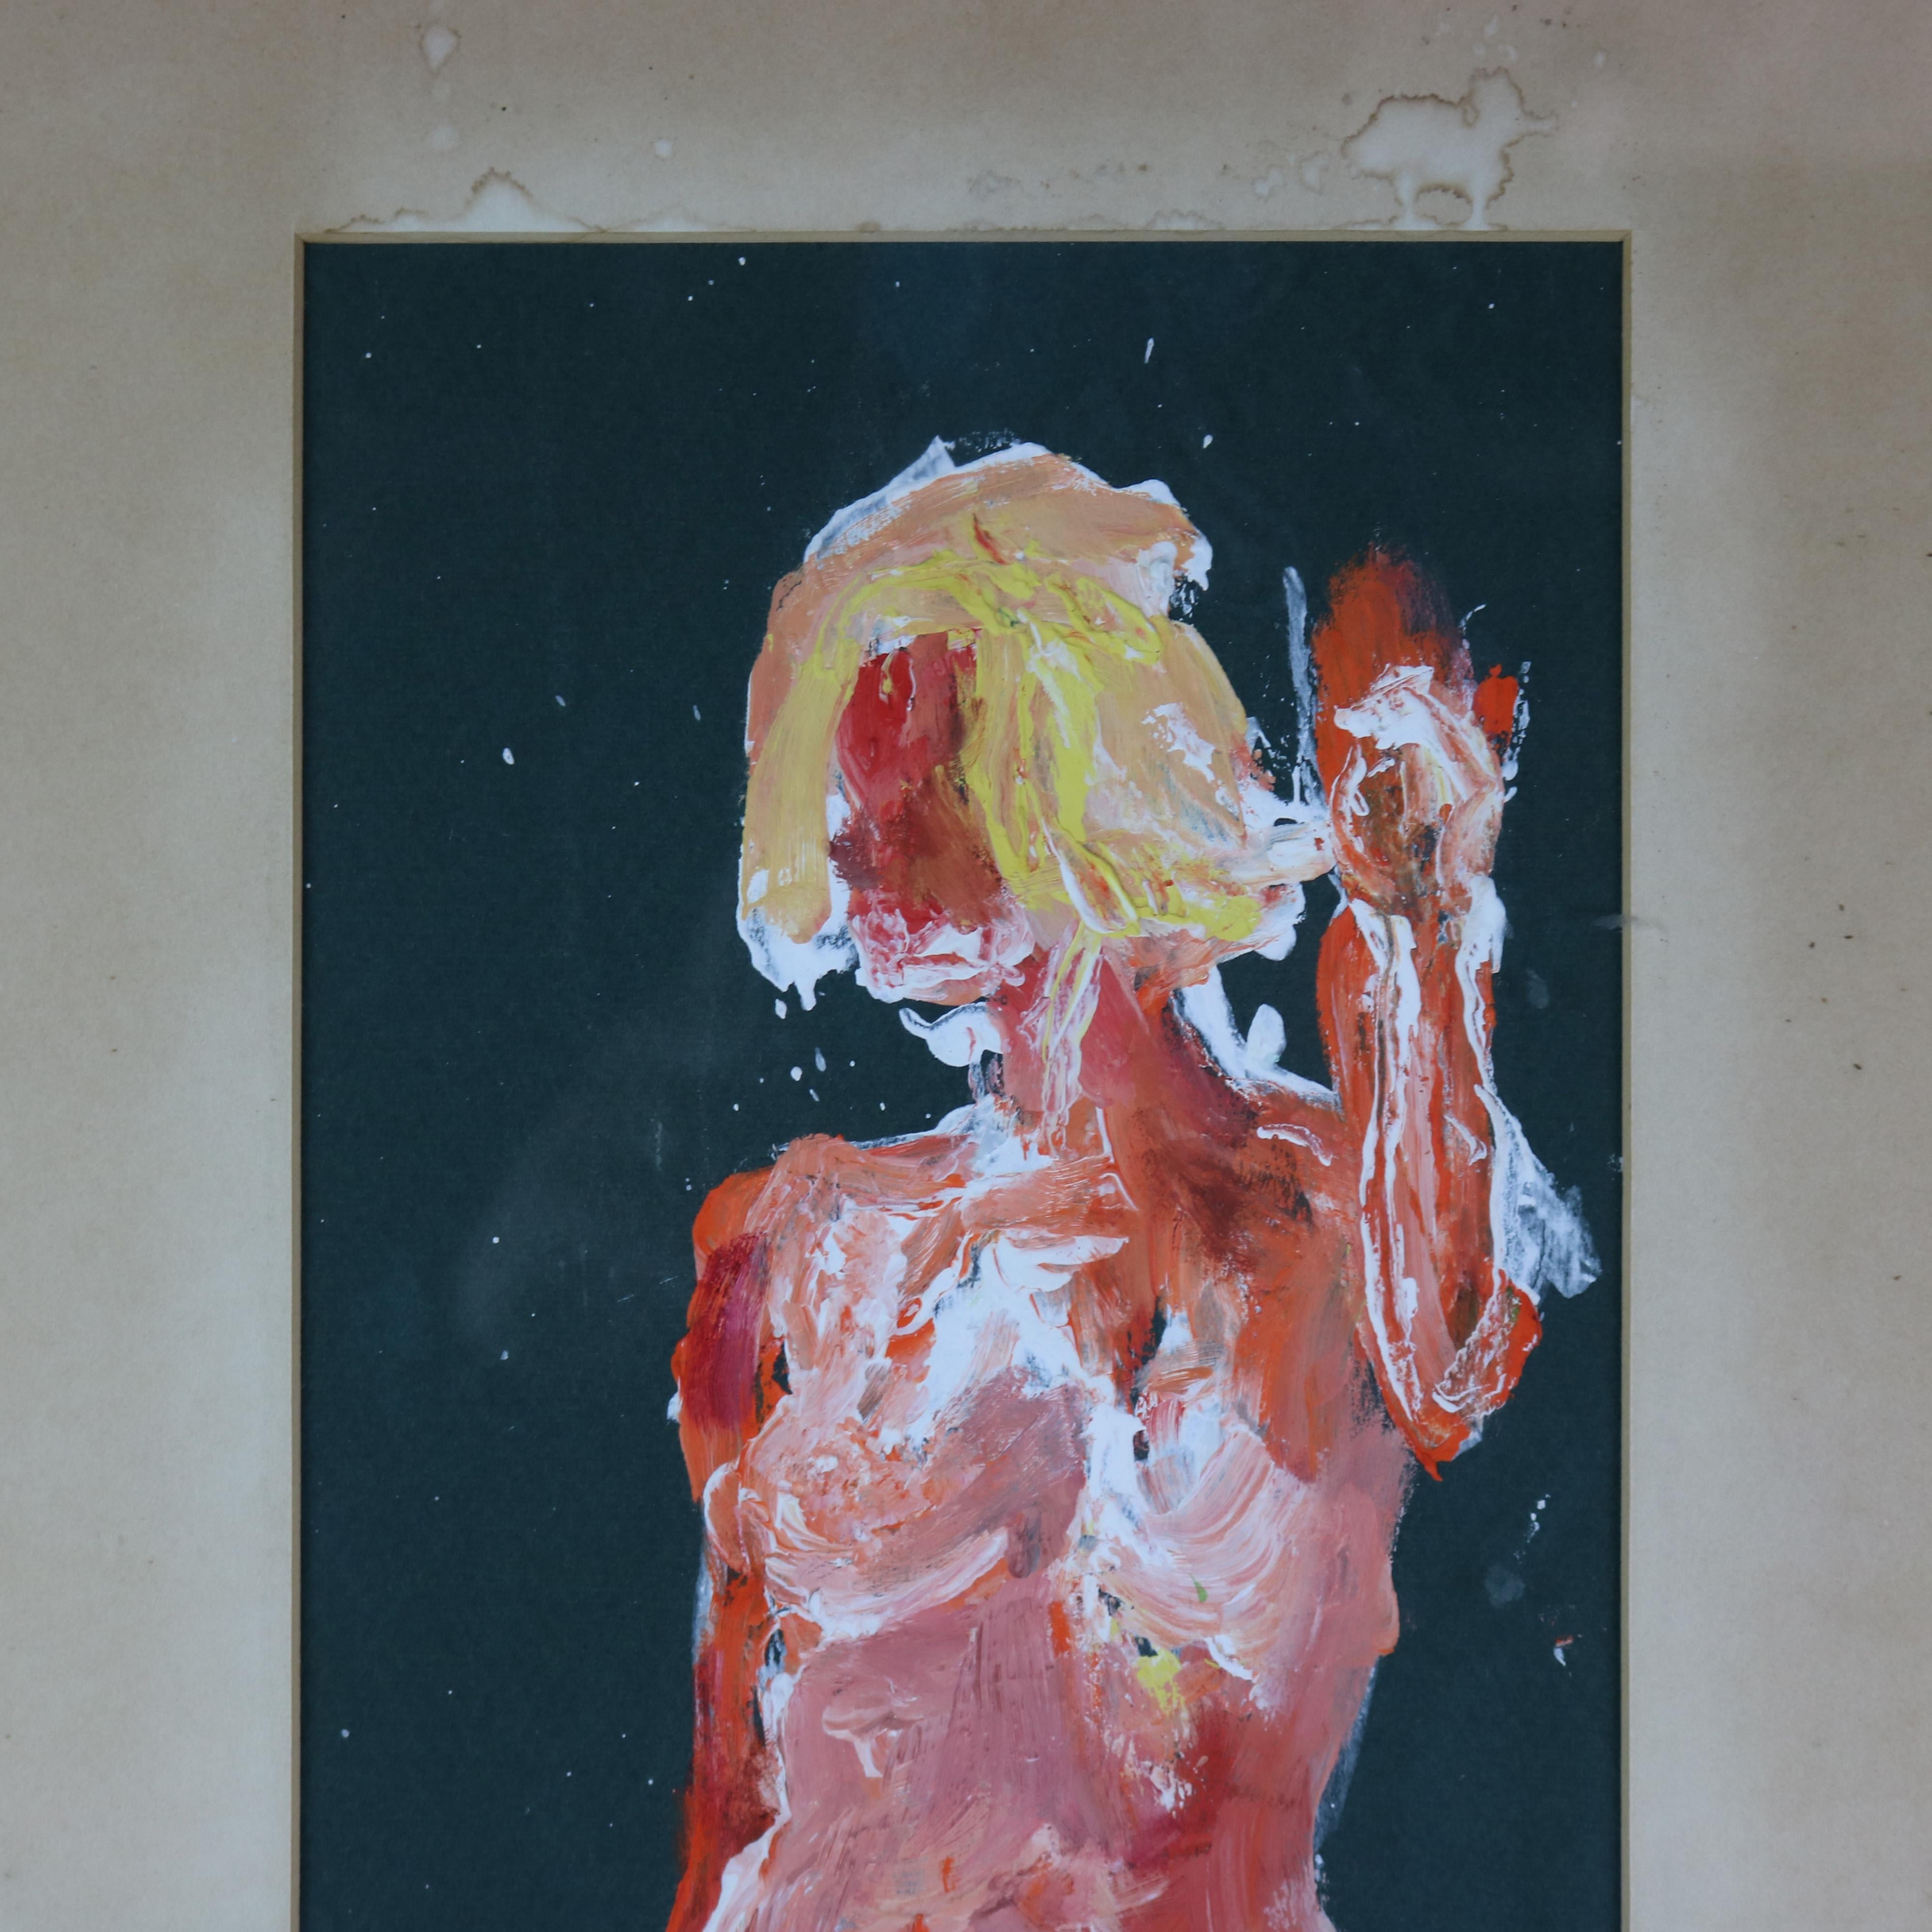 A Mid-Century Modern abstract oil painting on board by Skipper Mize offers impressionist full length nude portrait of figure, artist signed lower right, seated in matting and frame, c1960 

Measures: 24.25